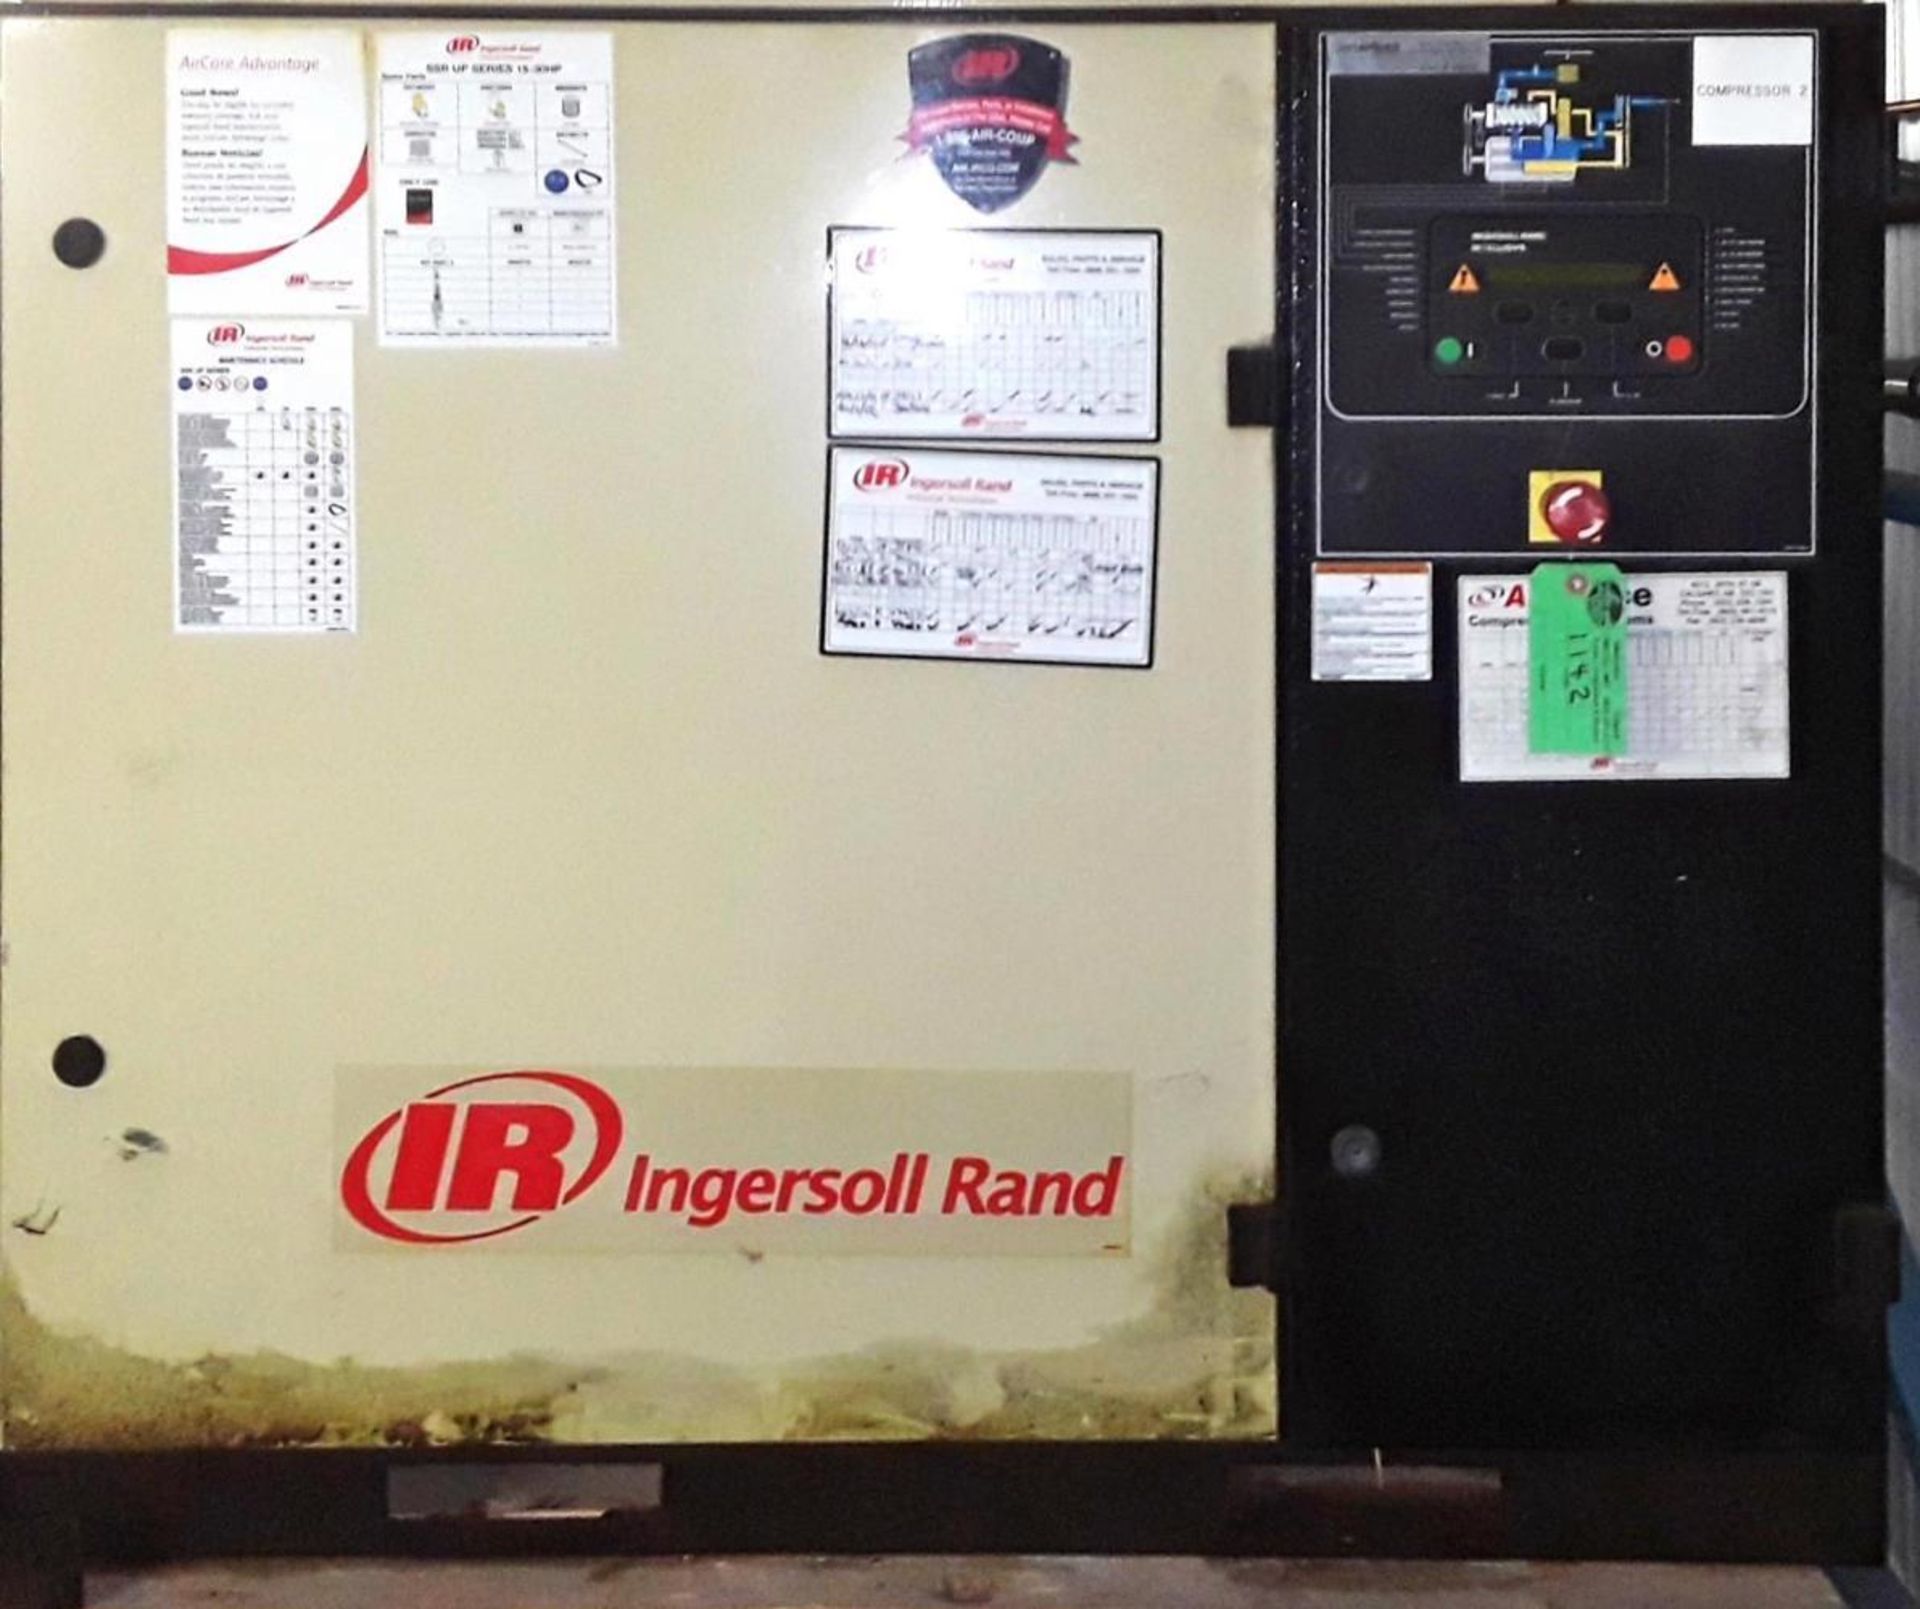 INGERSOLL-RAND SSR UP6-15-125 ROTARY SCREW AIR COMPRESSOR WITH 15 HP, 90 PSI, 65 CFM, S/N: